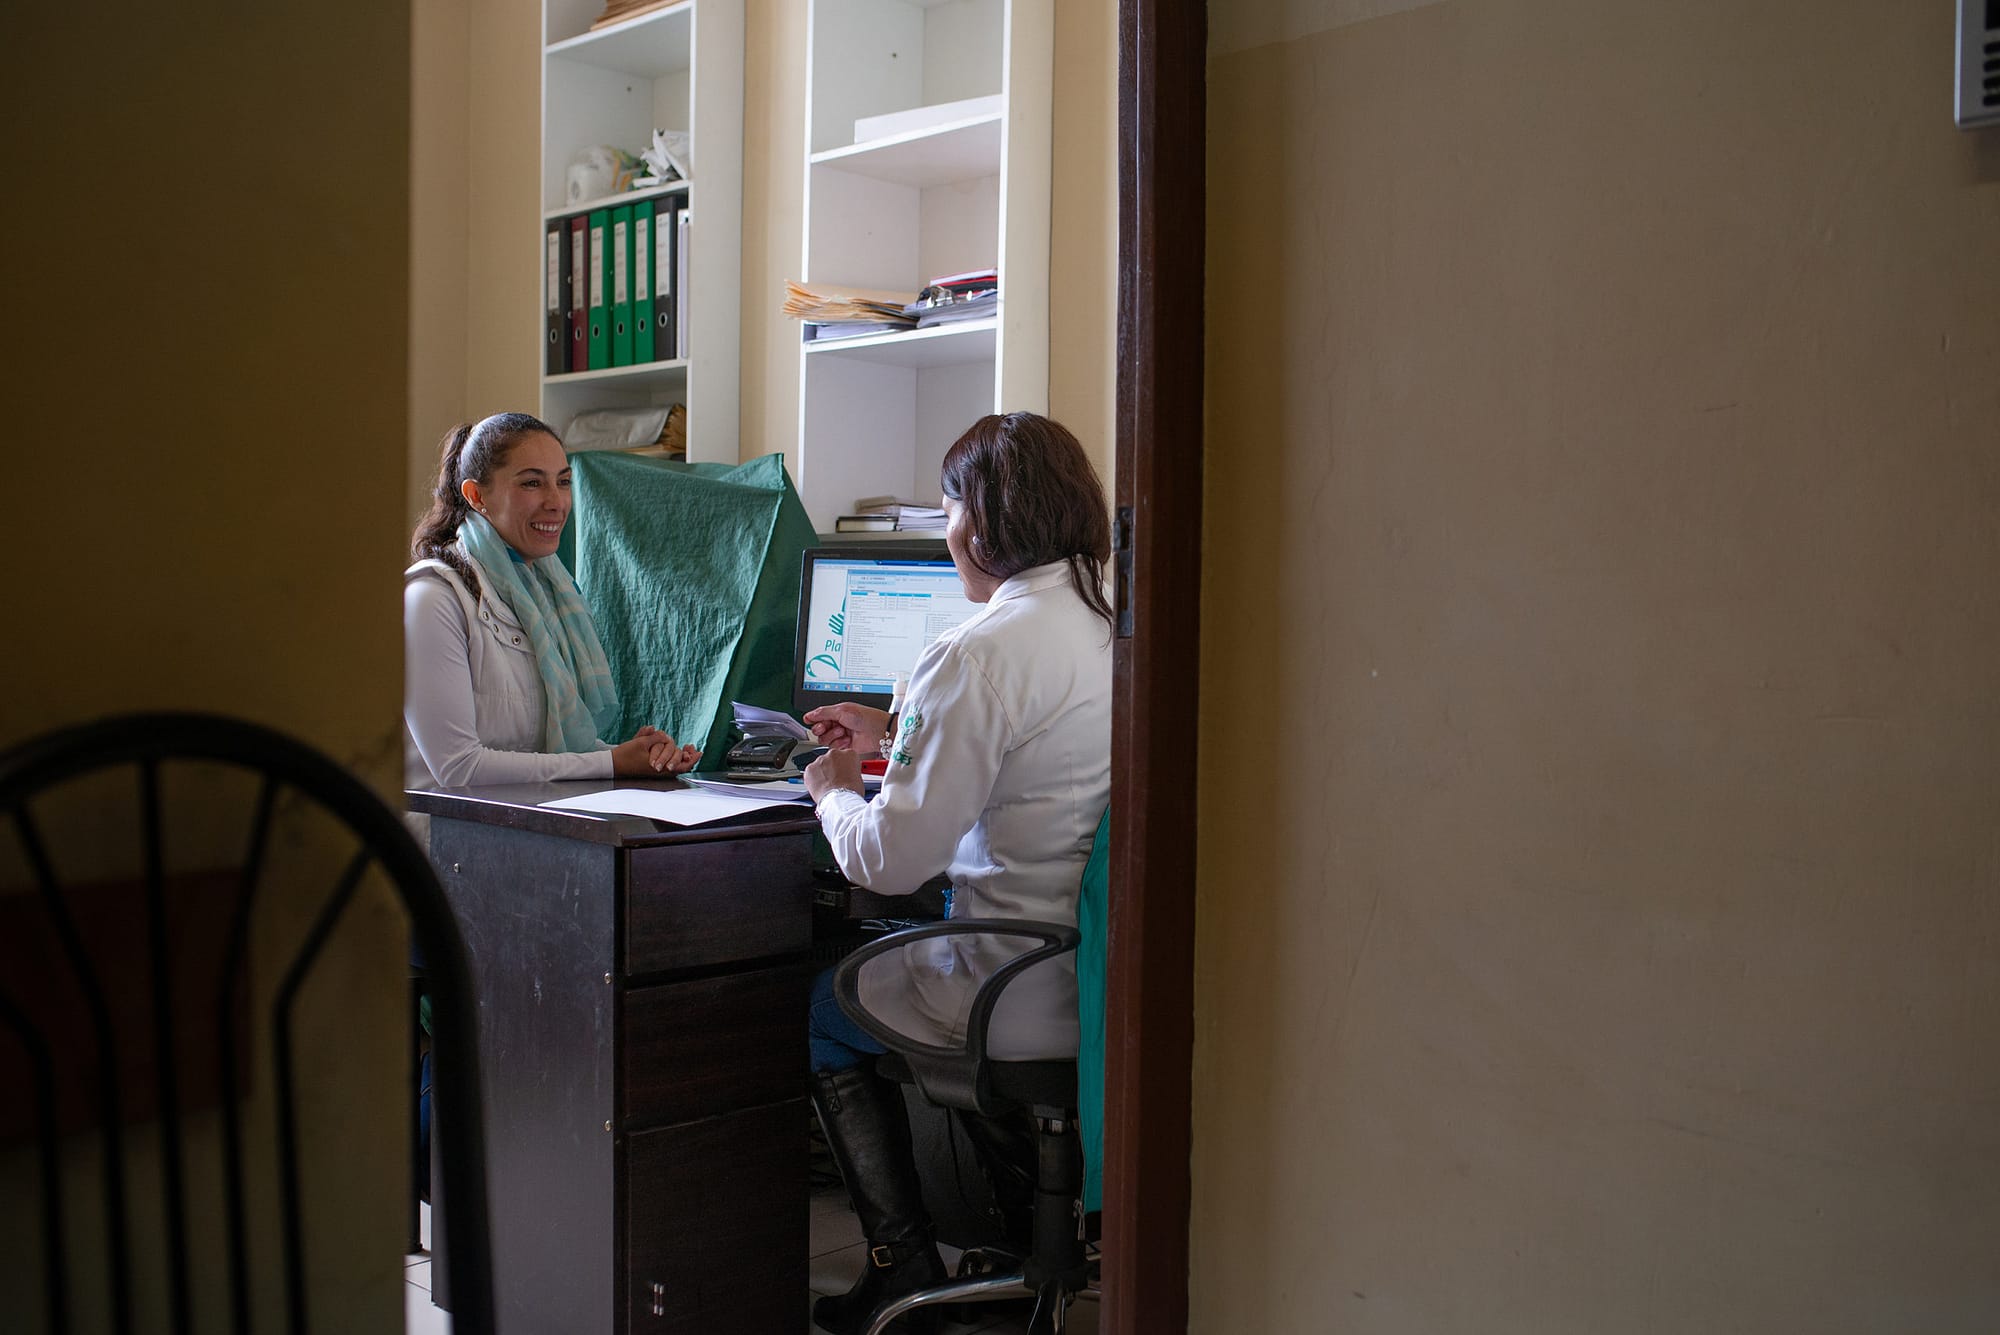 Two woman discussing in hospital setting